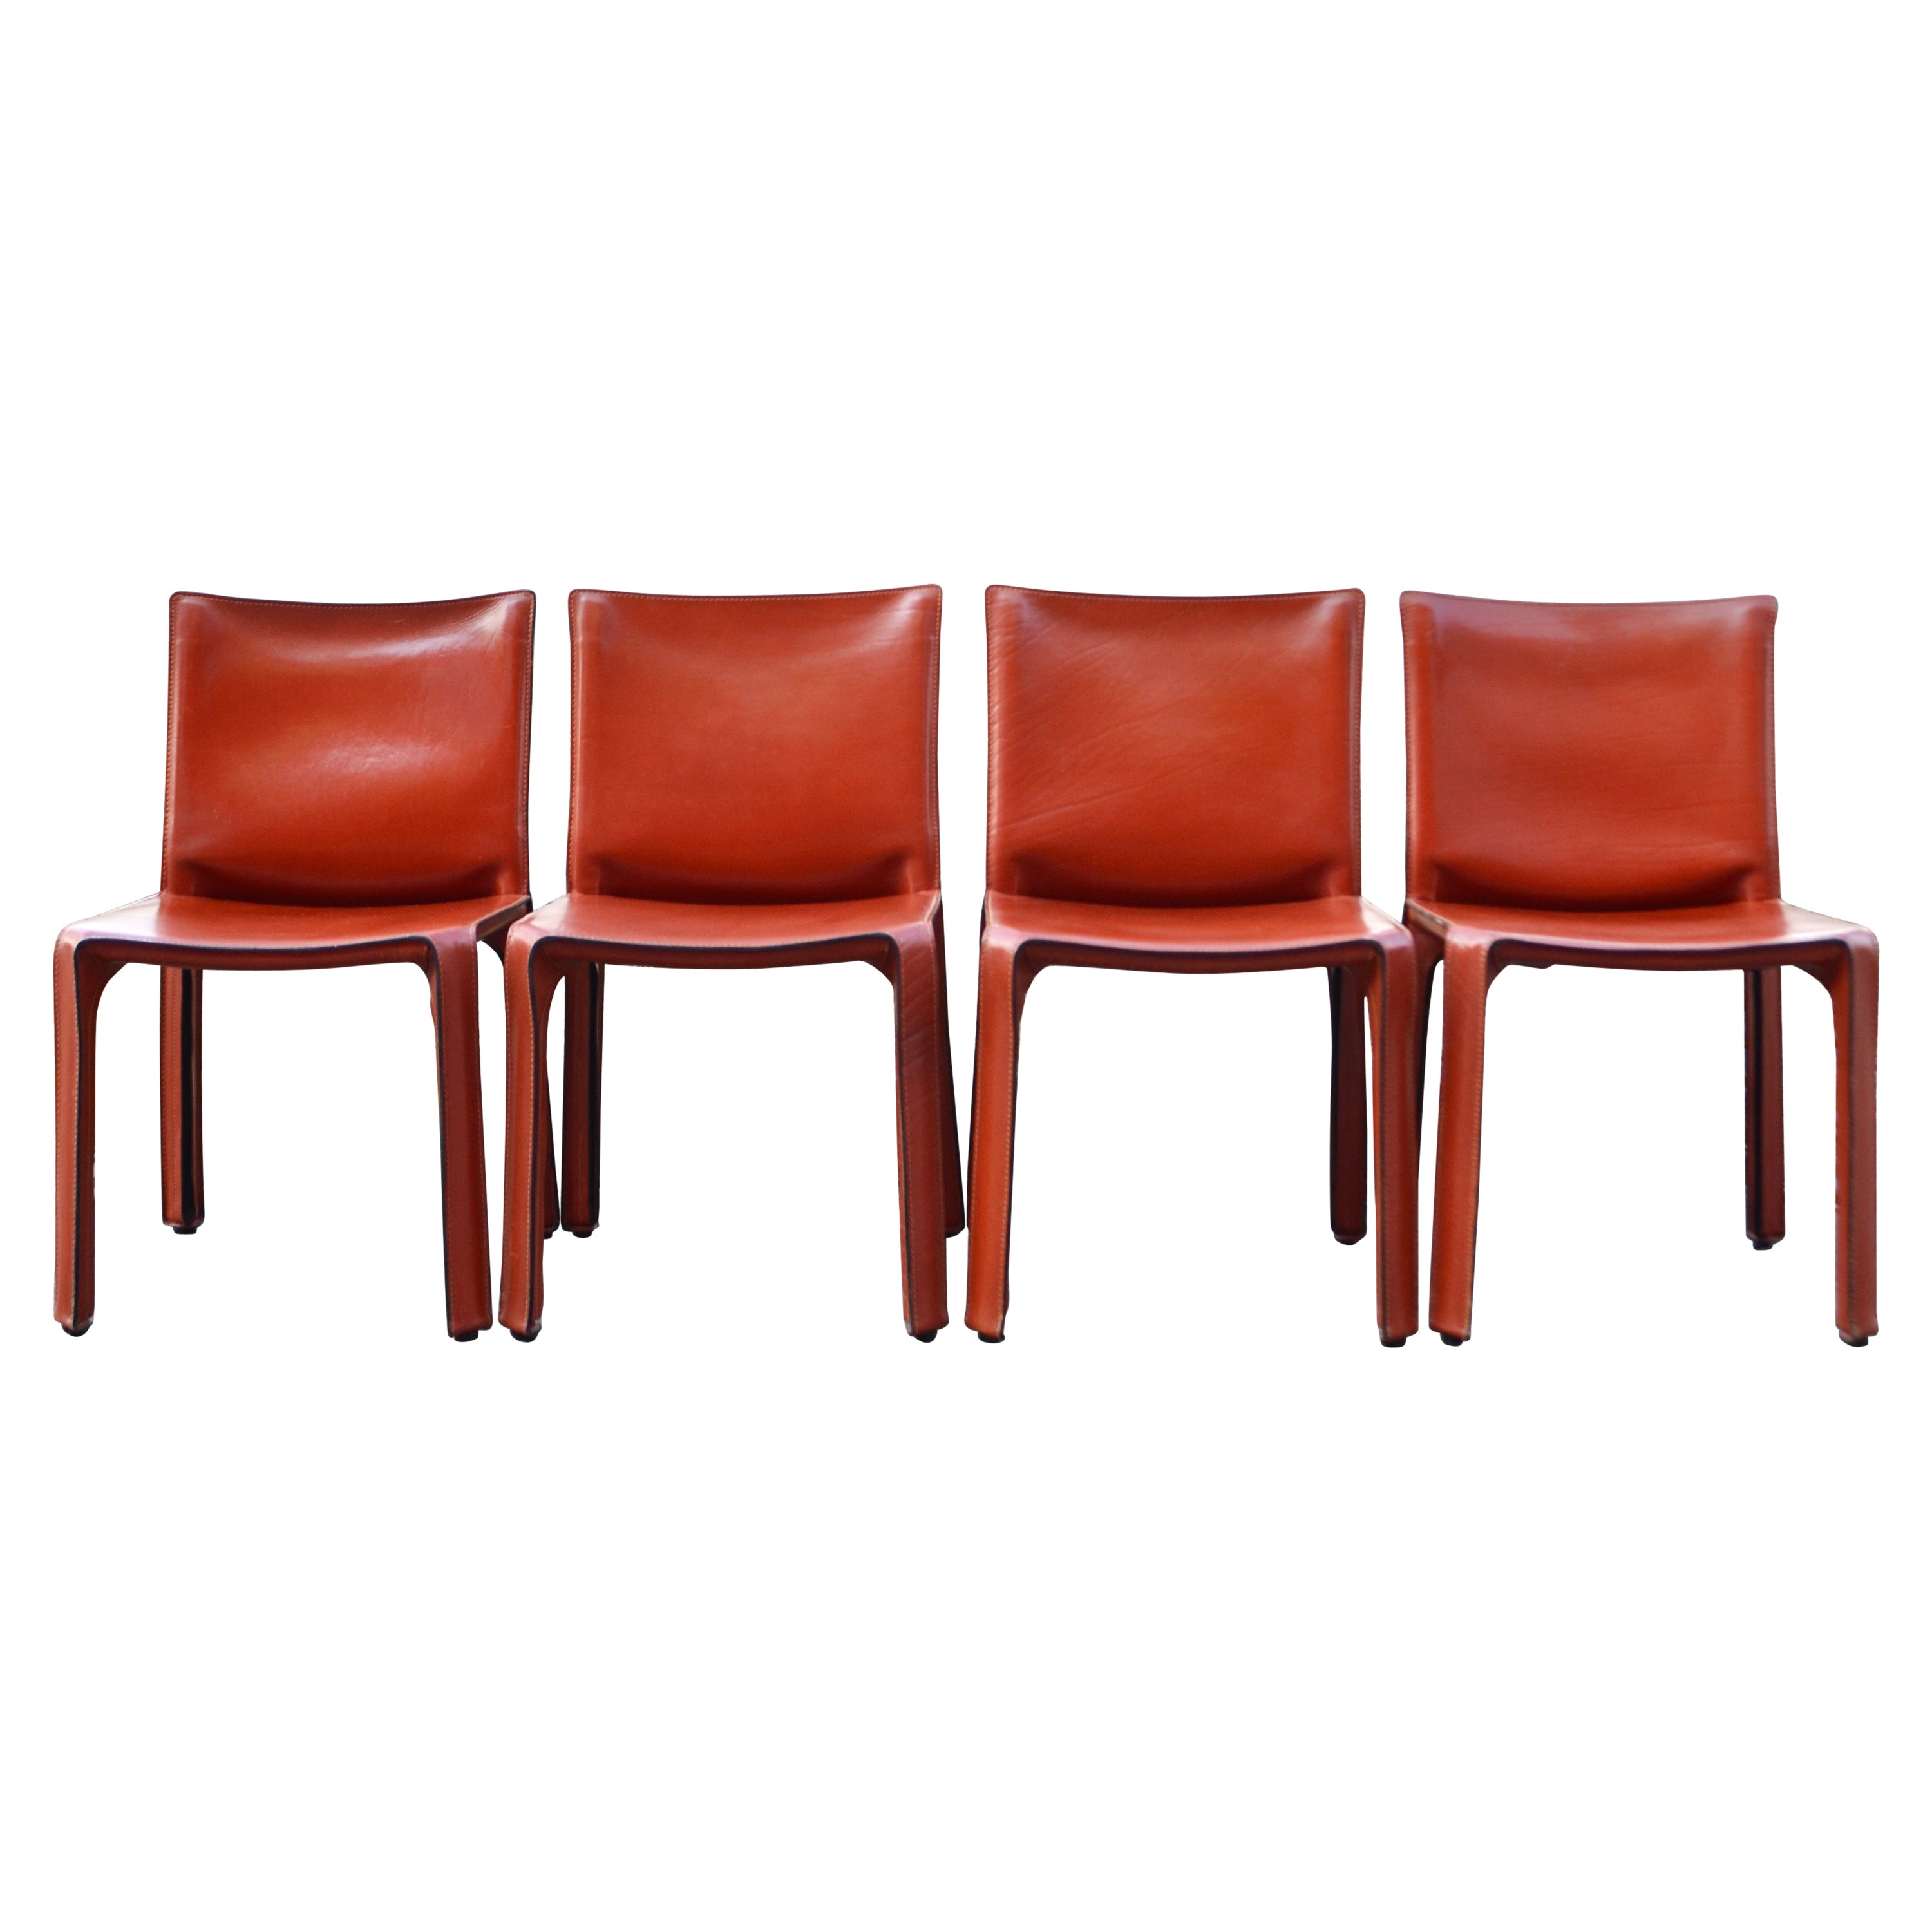 Cassina Cab 412 China Red Leather Dining Chair Set of 4